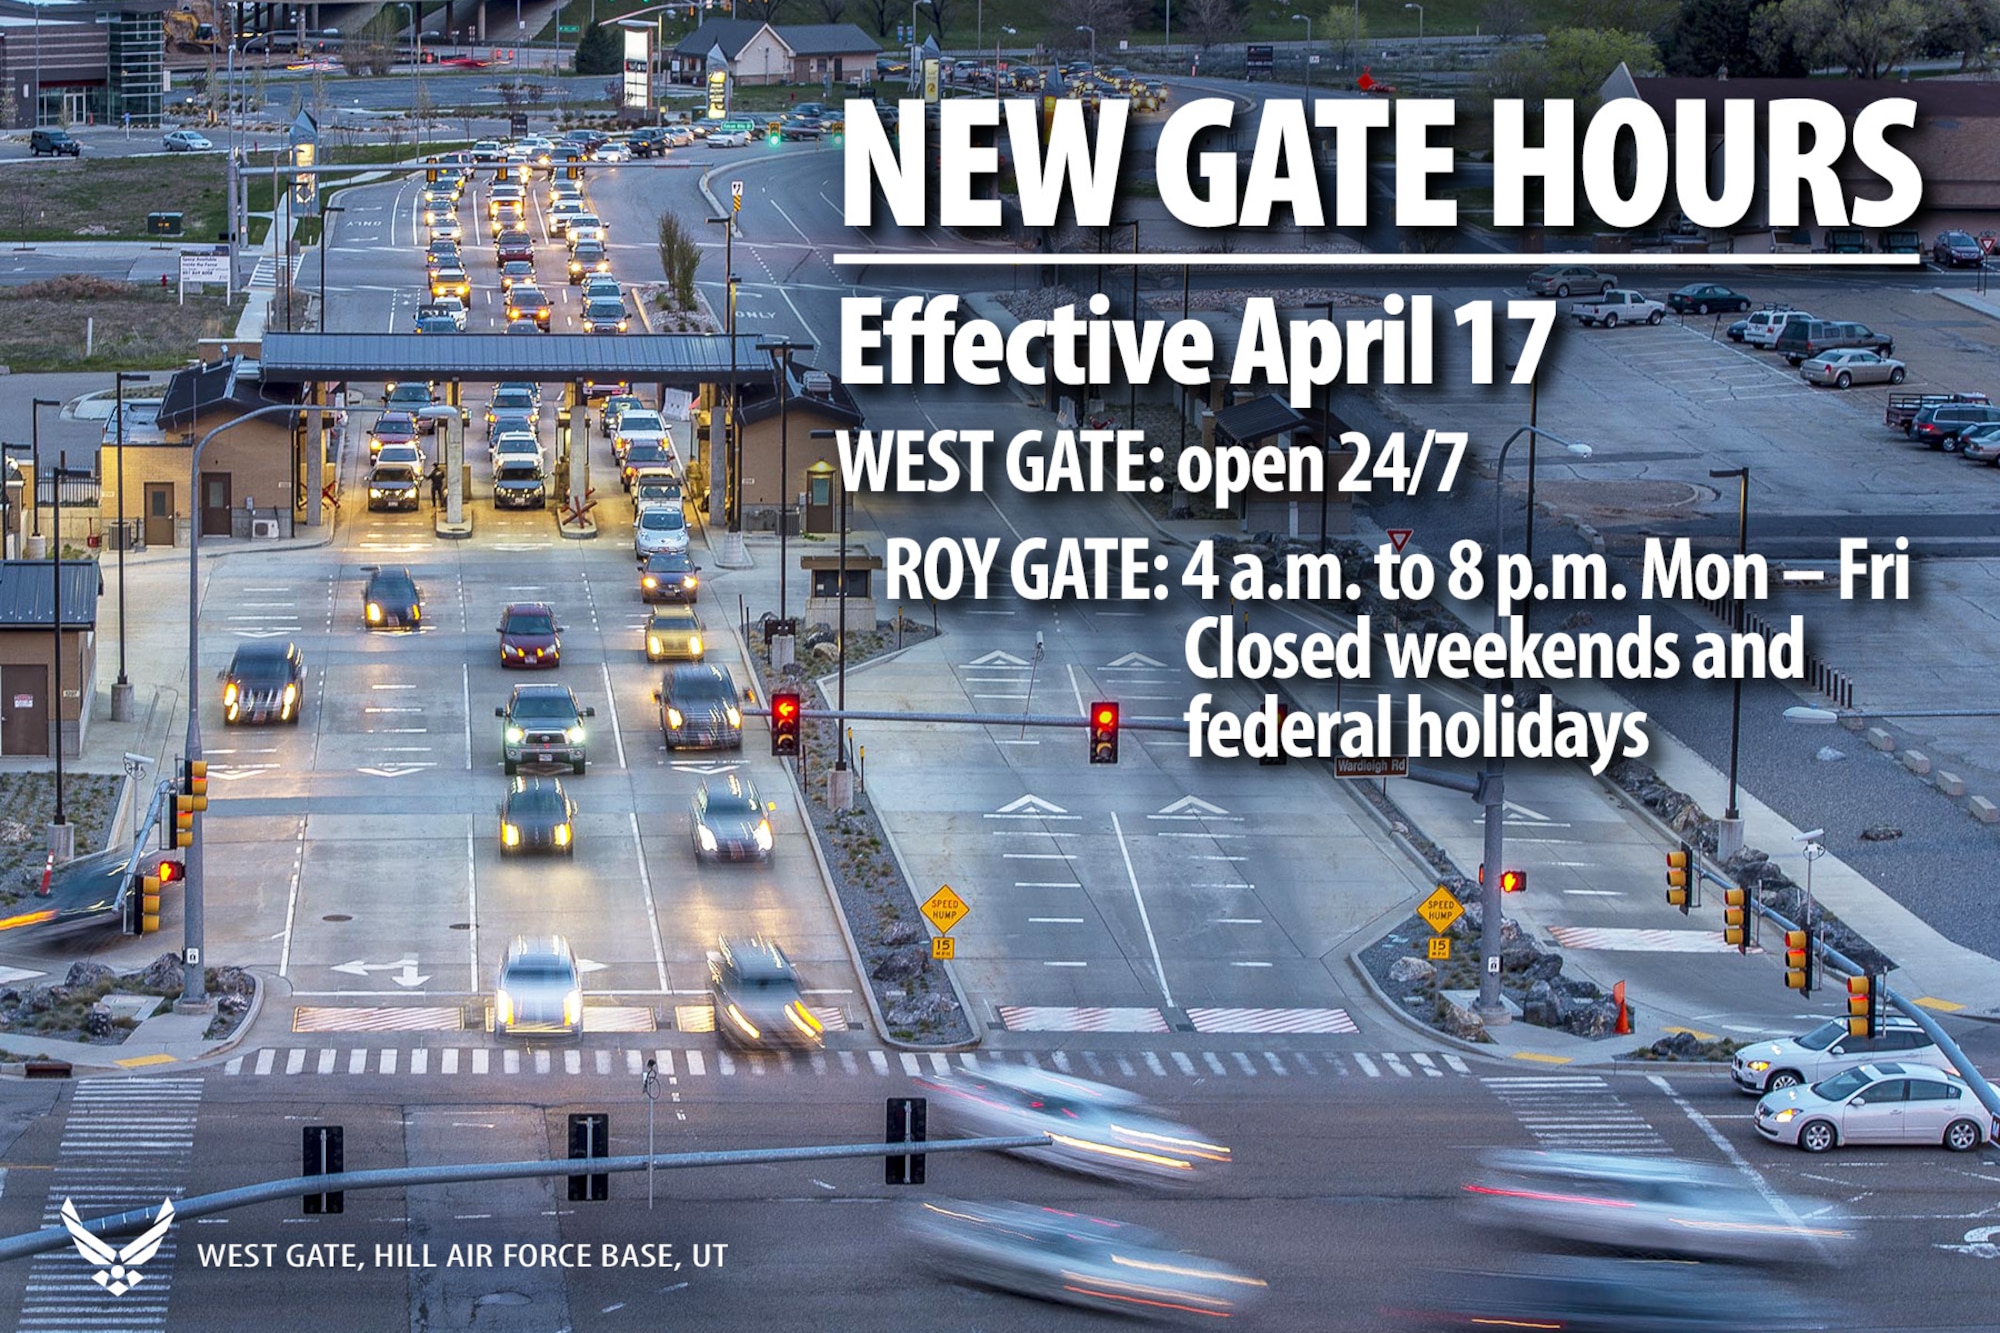 The Hill AFB West Gate will become a 24/7 access entry control point starting April 17. When the change occurs, the Roy Gate's new hours will be 4 a.m. to 8 p.m. Monday Friday and it will be closed on weekends and federal holidays. (U.S. Air Force graphic by David Perry)
